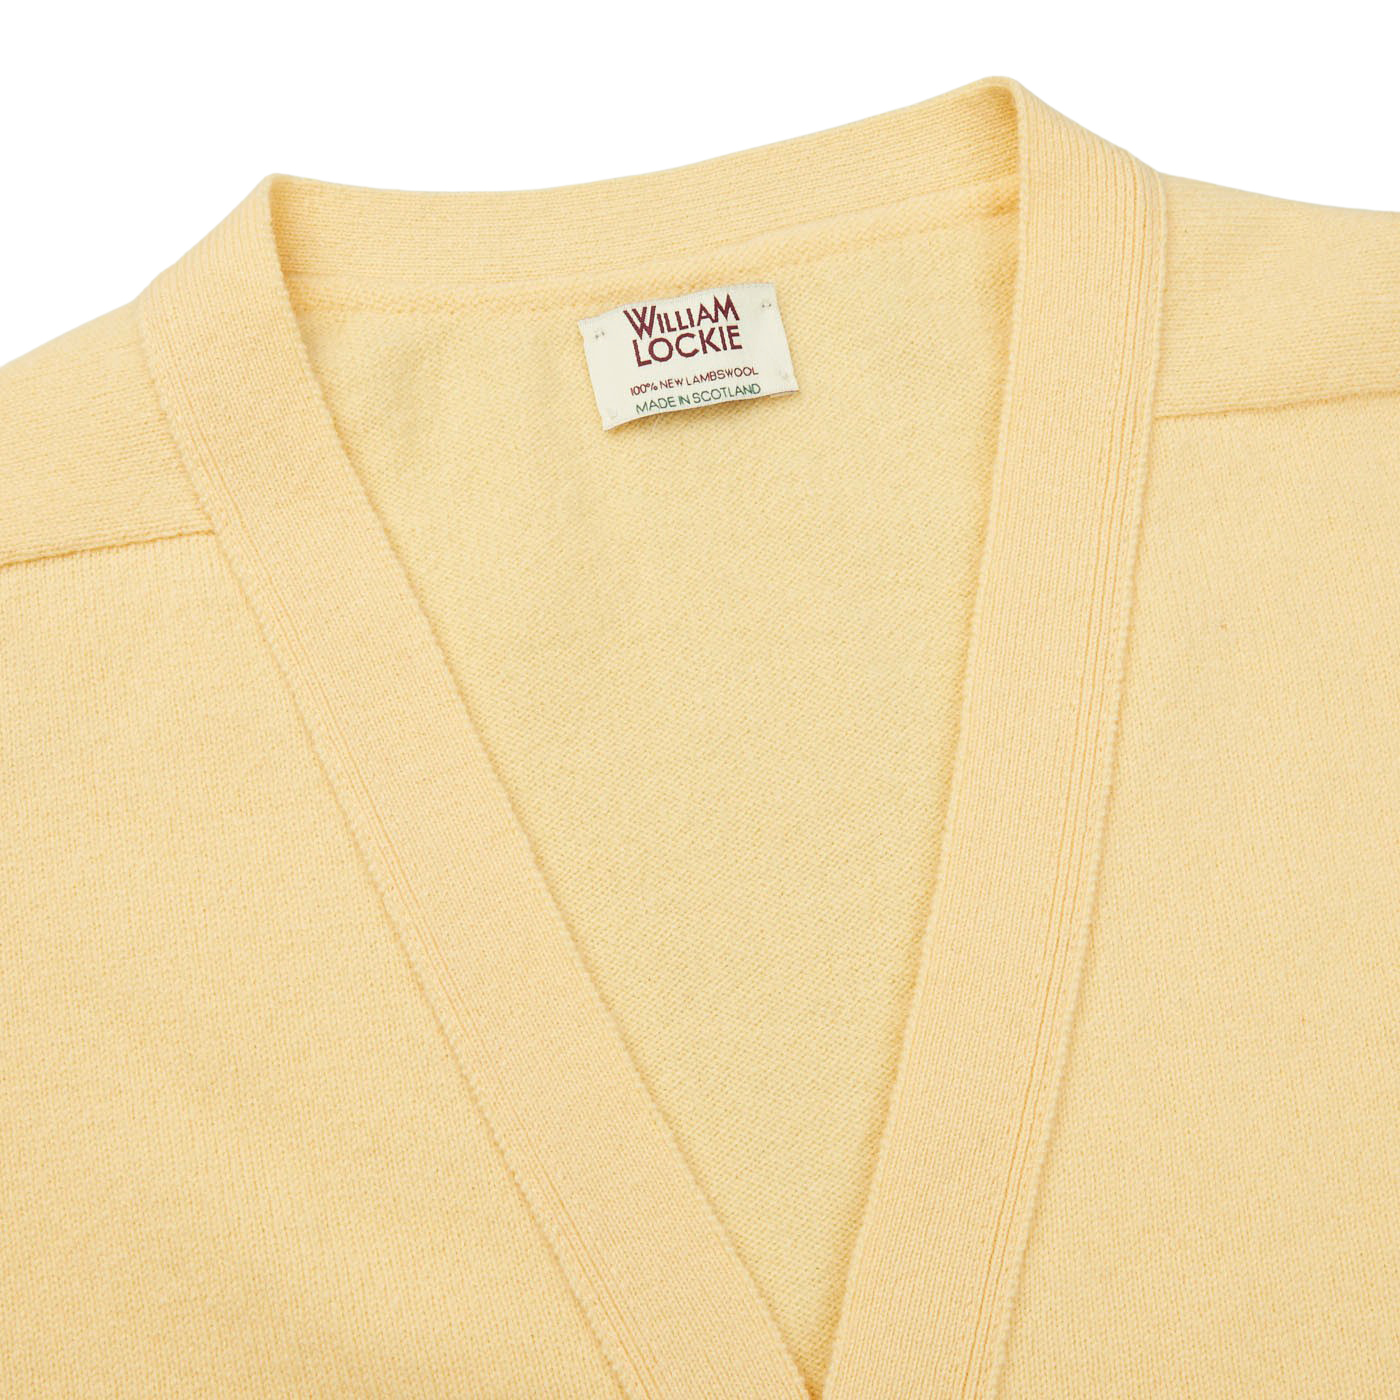 This regular fit, Solar Yellow Lambswool Saddle Shoulder Cardigan is crafted from Scottish lambswool, made by William Lockie.